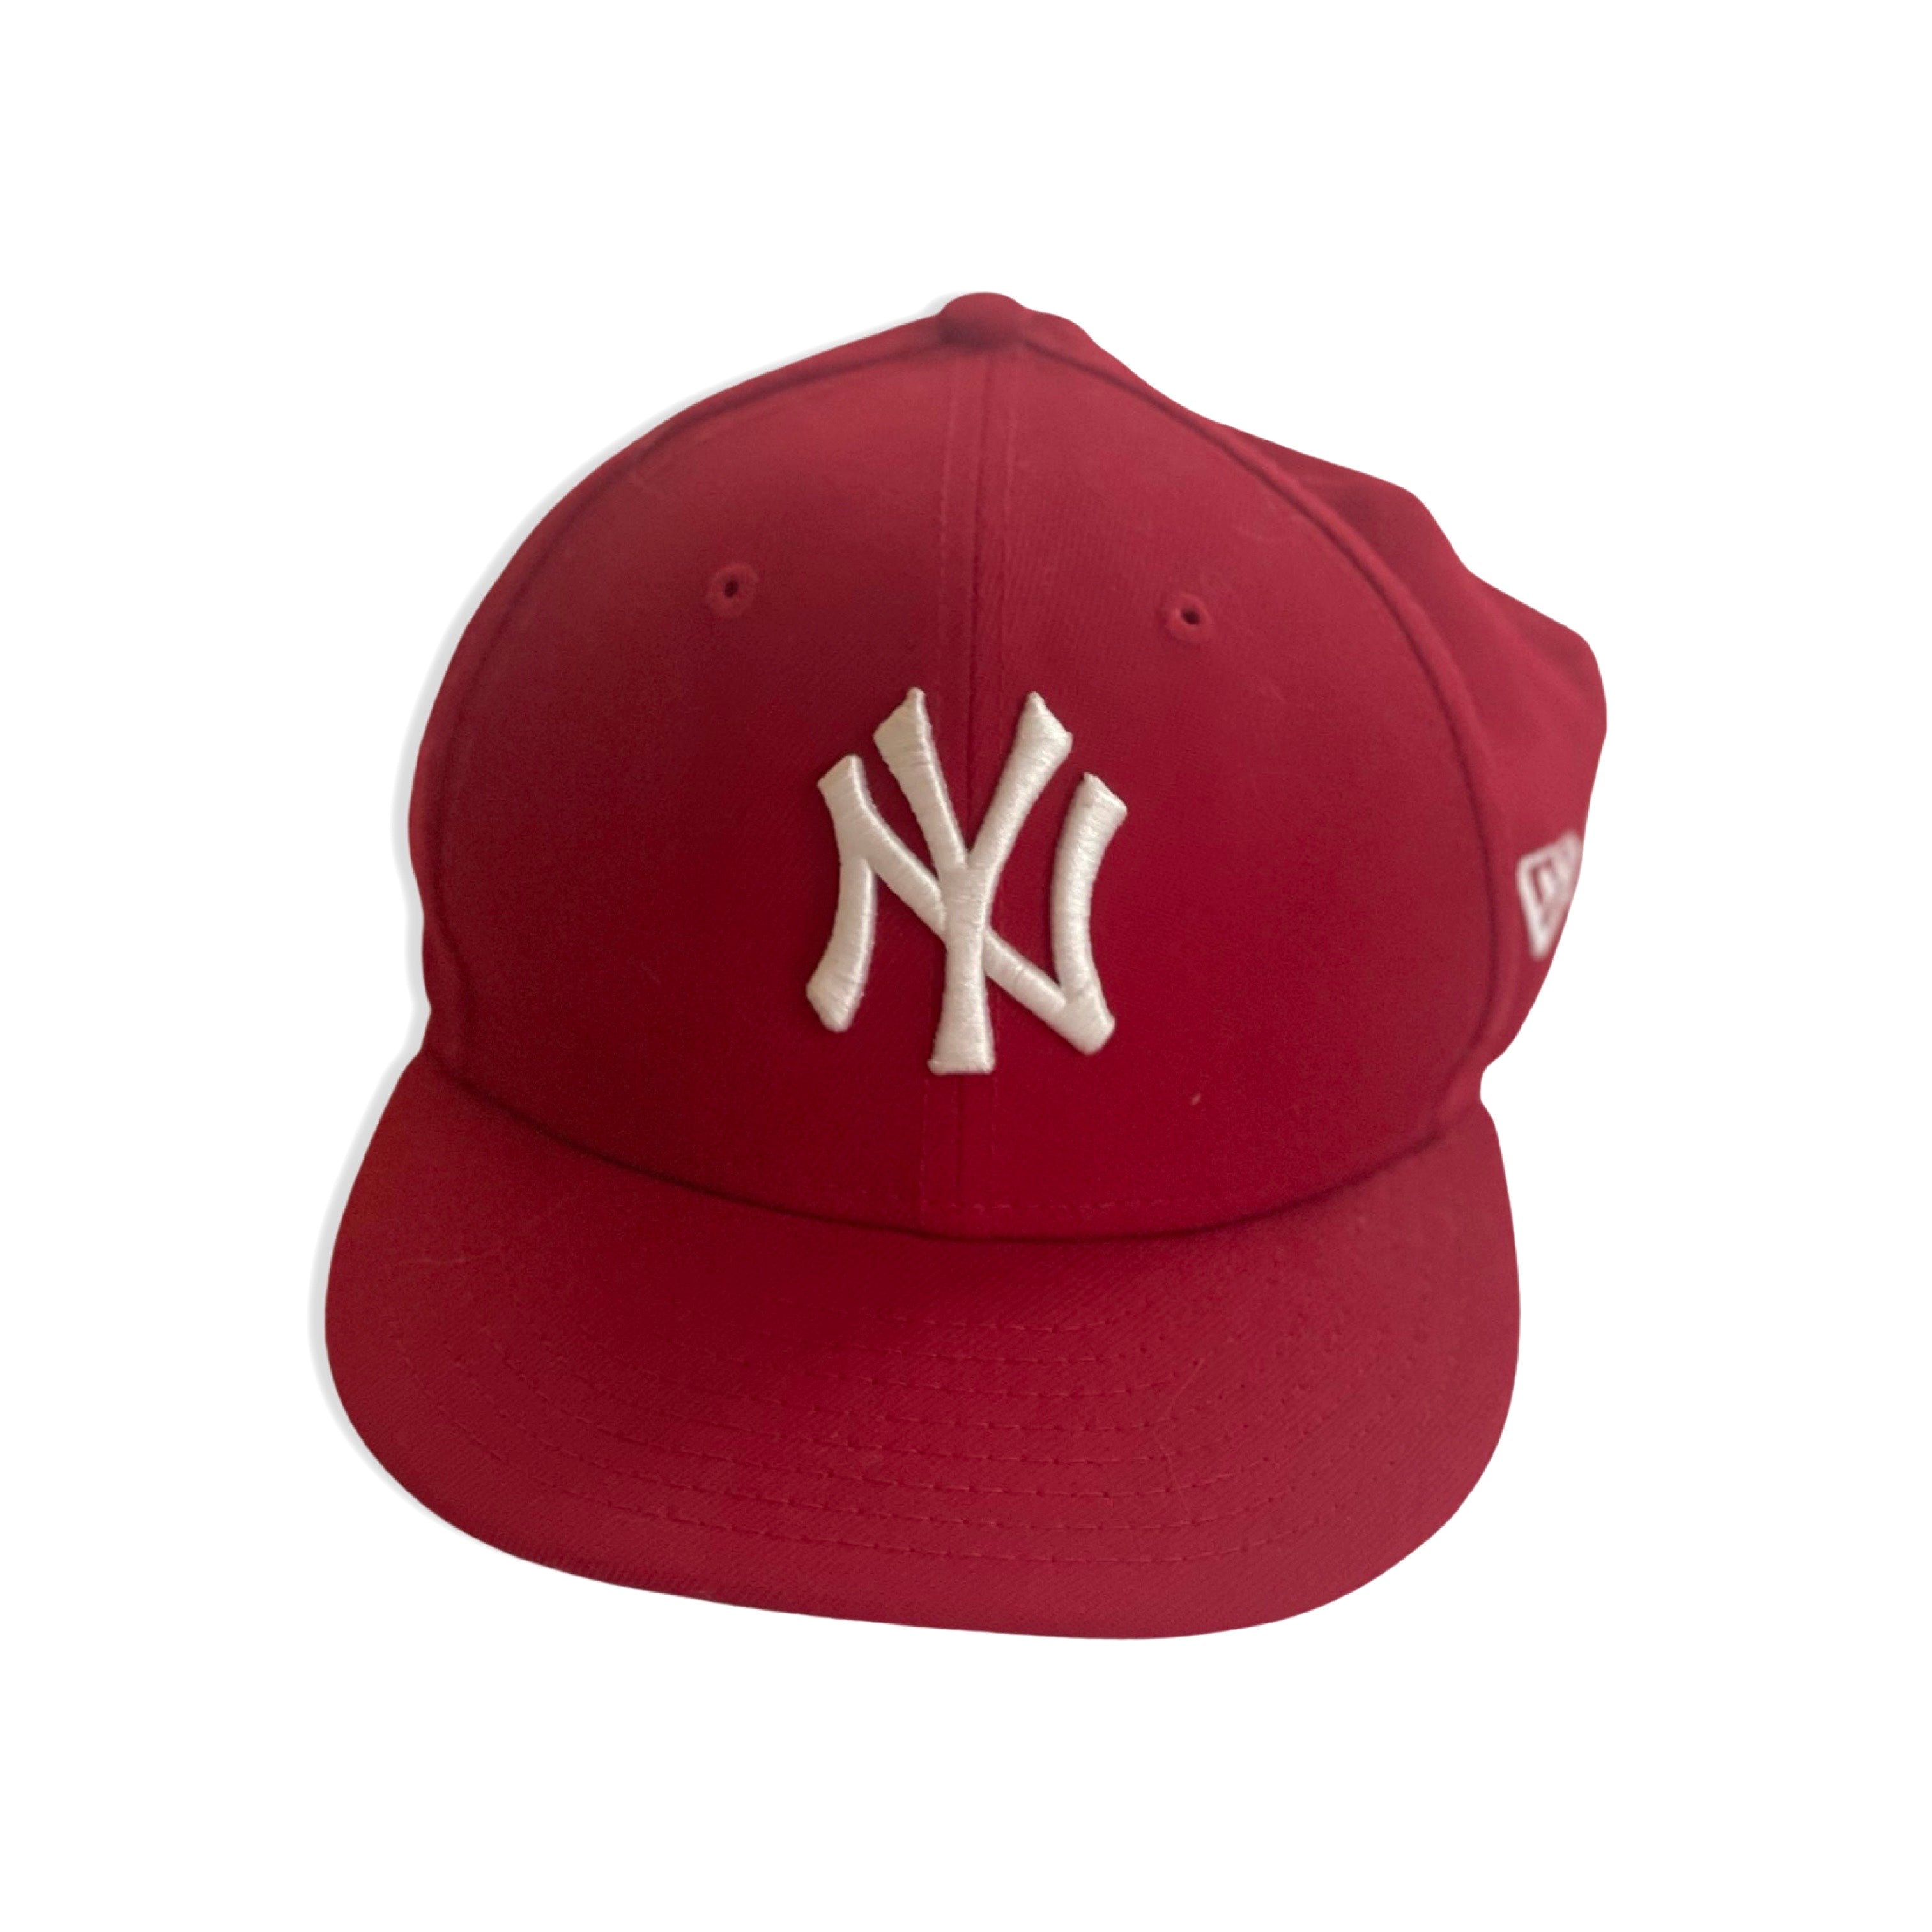 New York Yankees Cap in fire red.